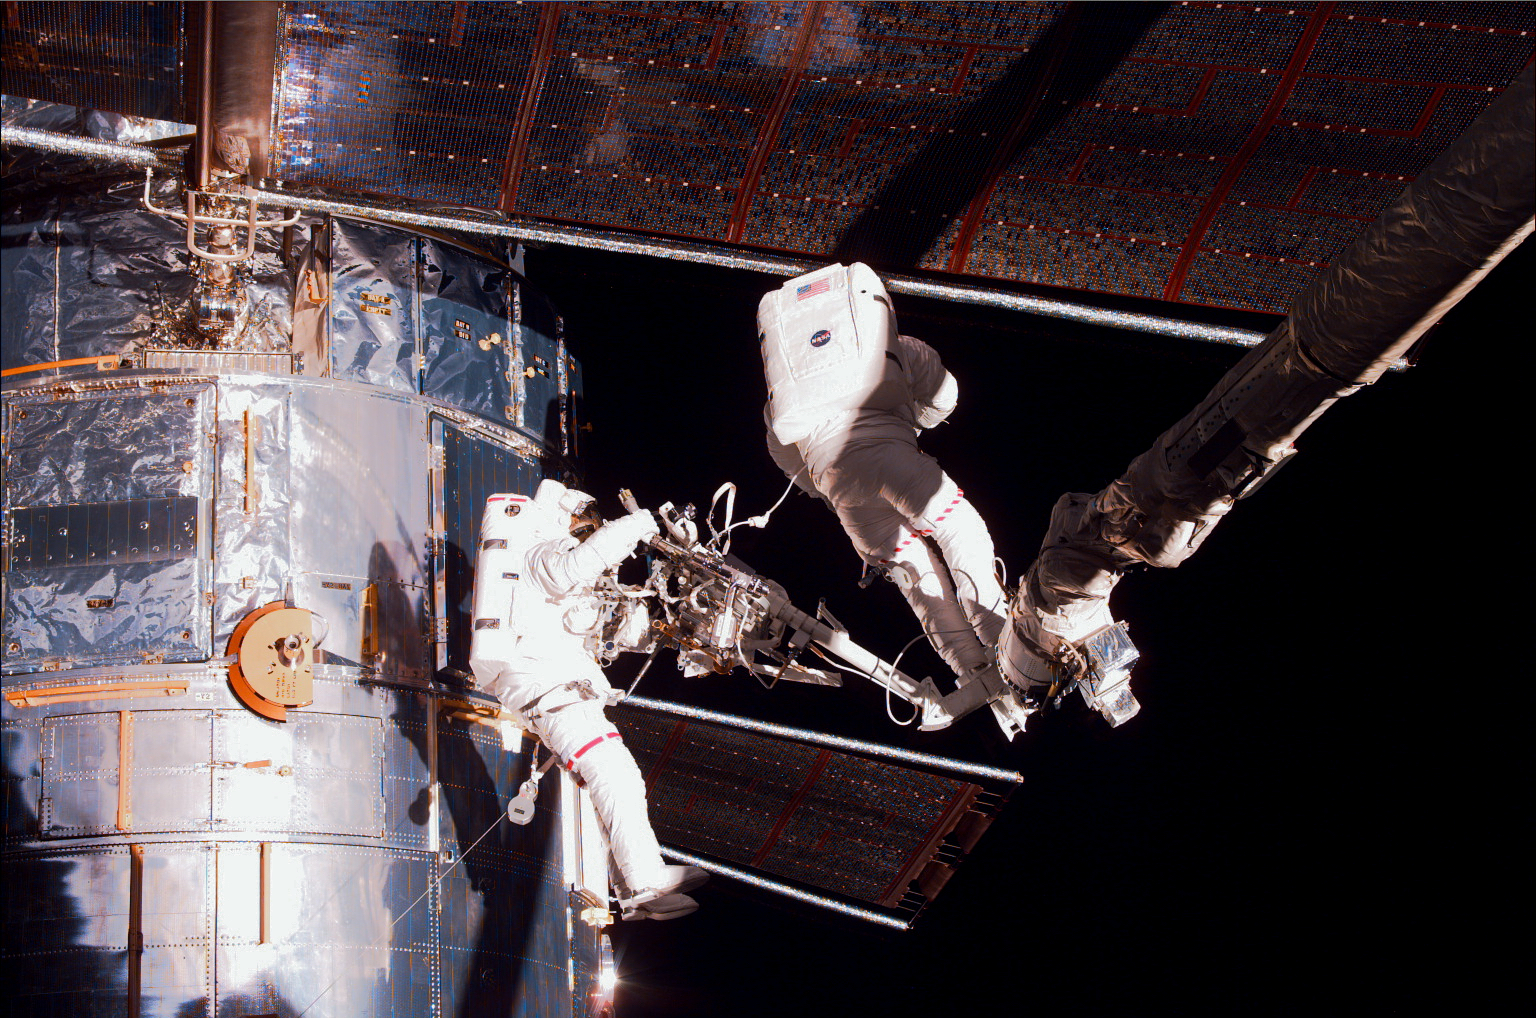 Two astronauts work on Hubble. The solar arrays are prominently visible. One astronaut is perched on the robotic arm.